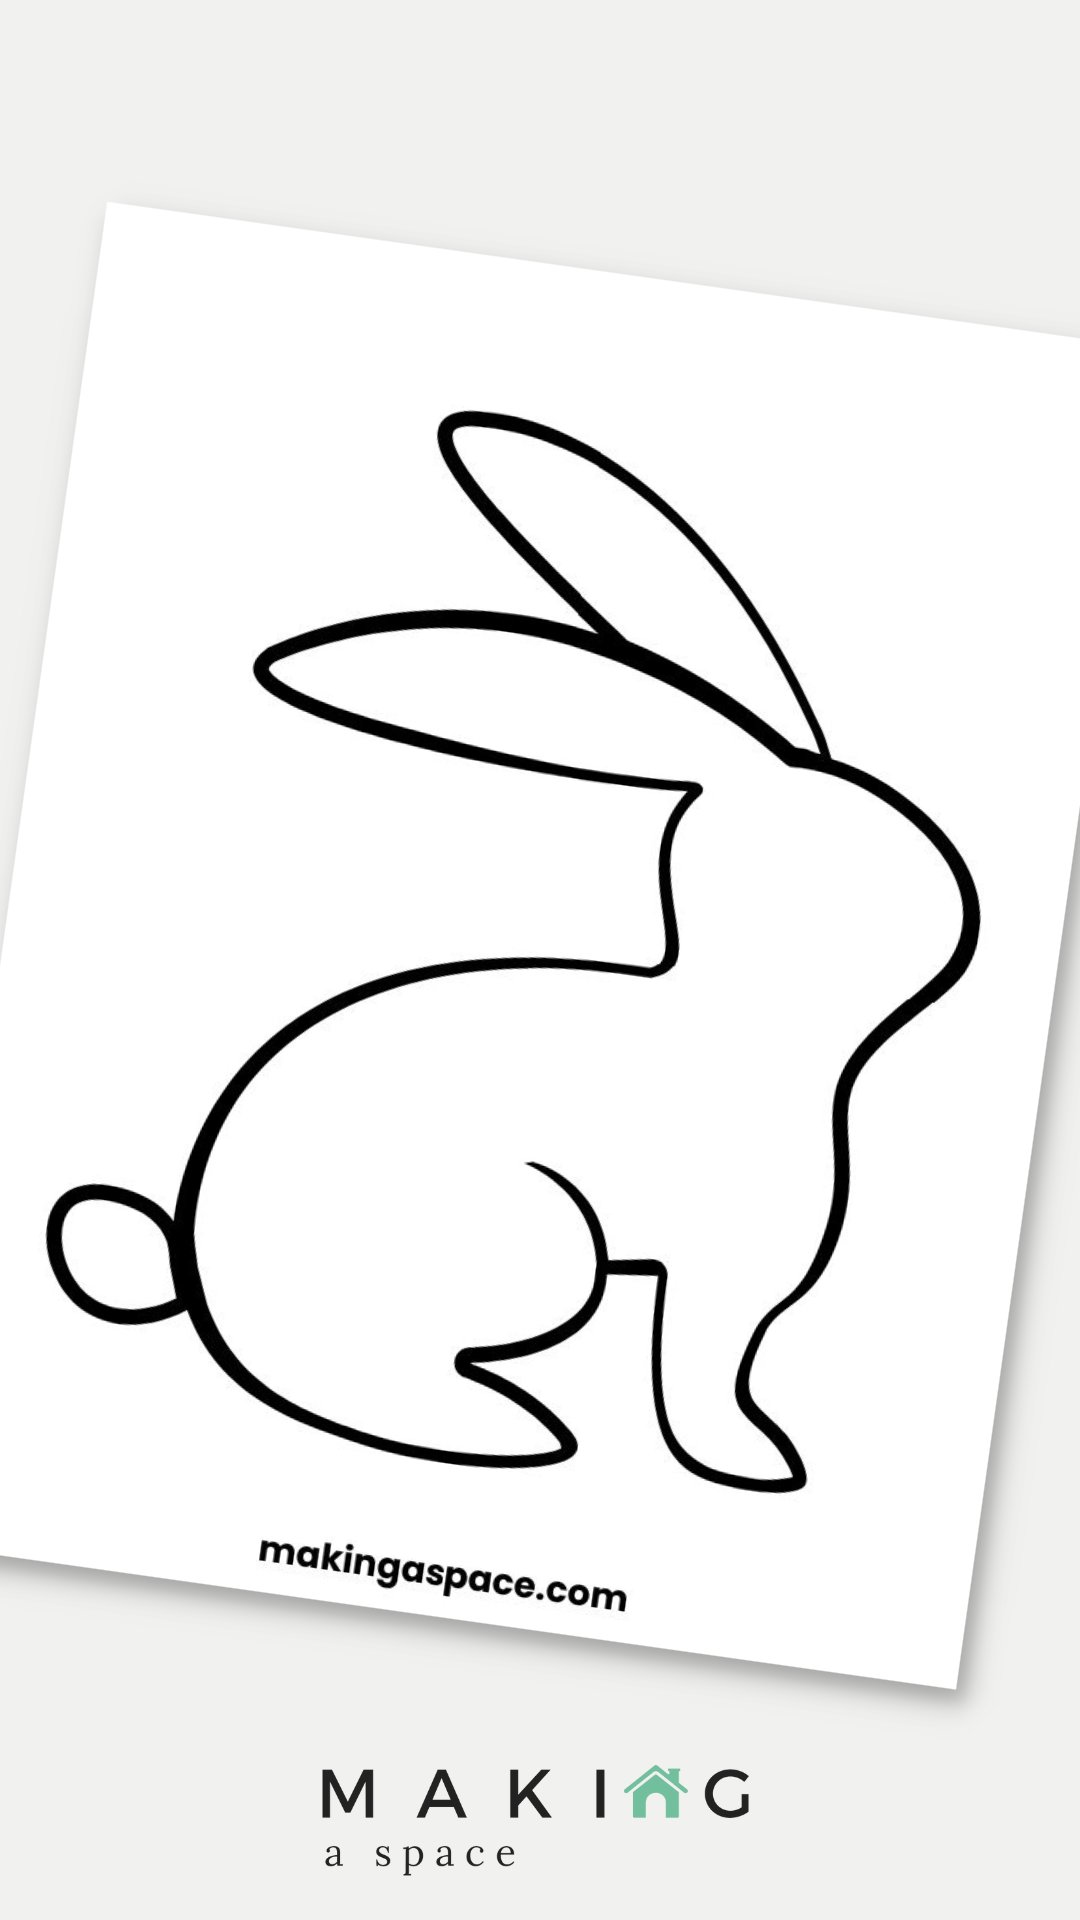 easter bunny outline